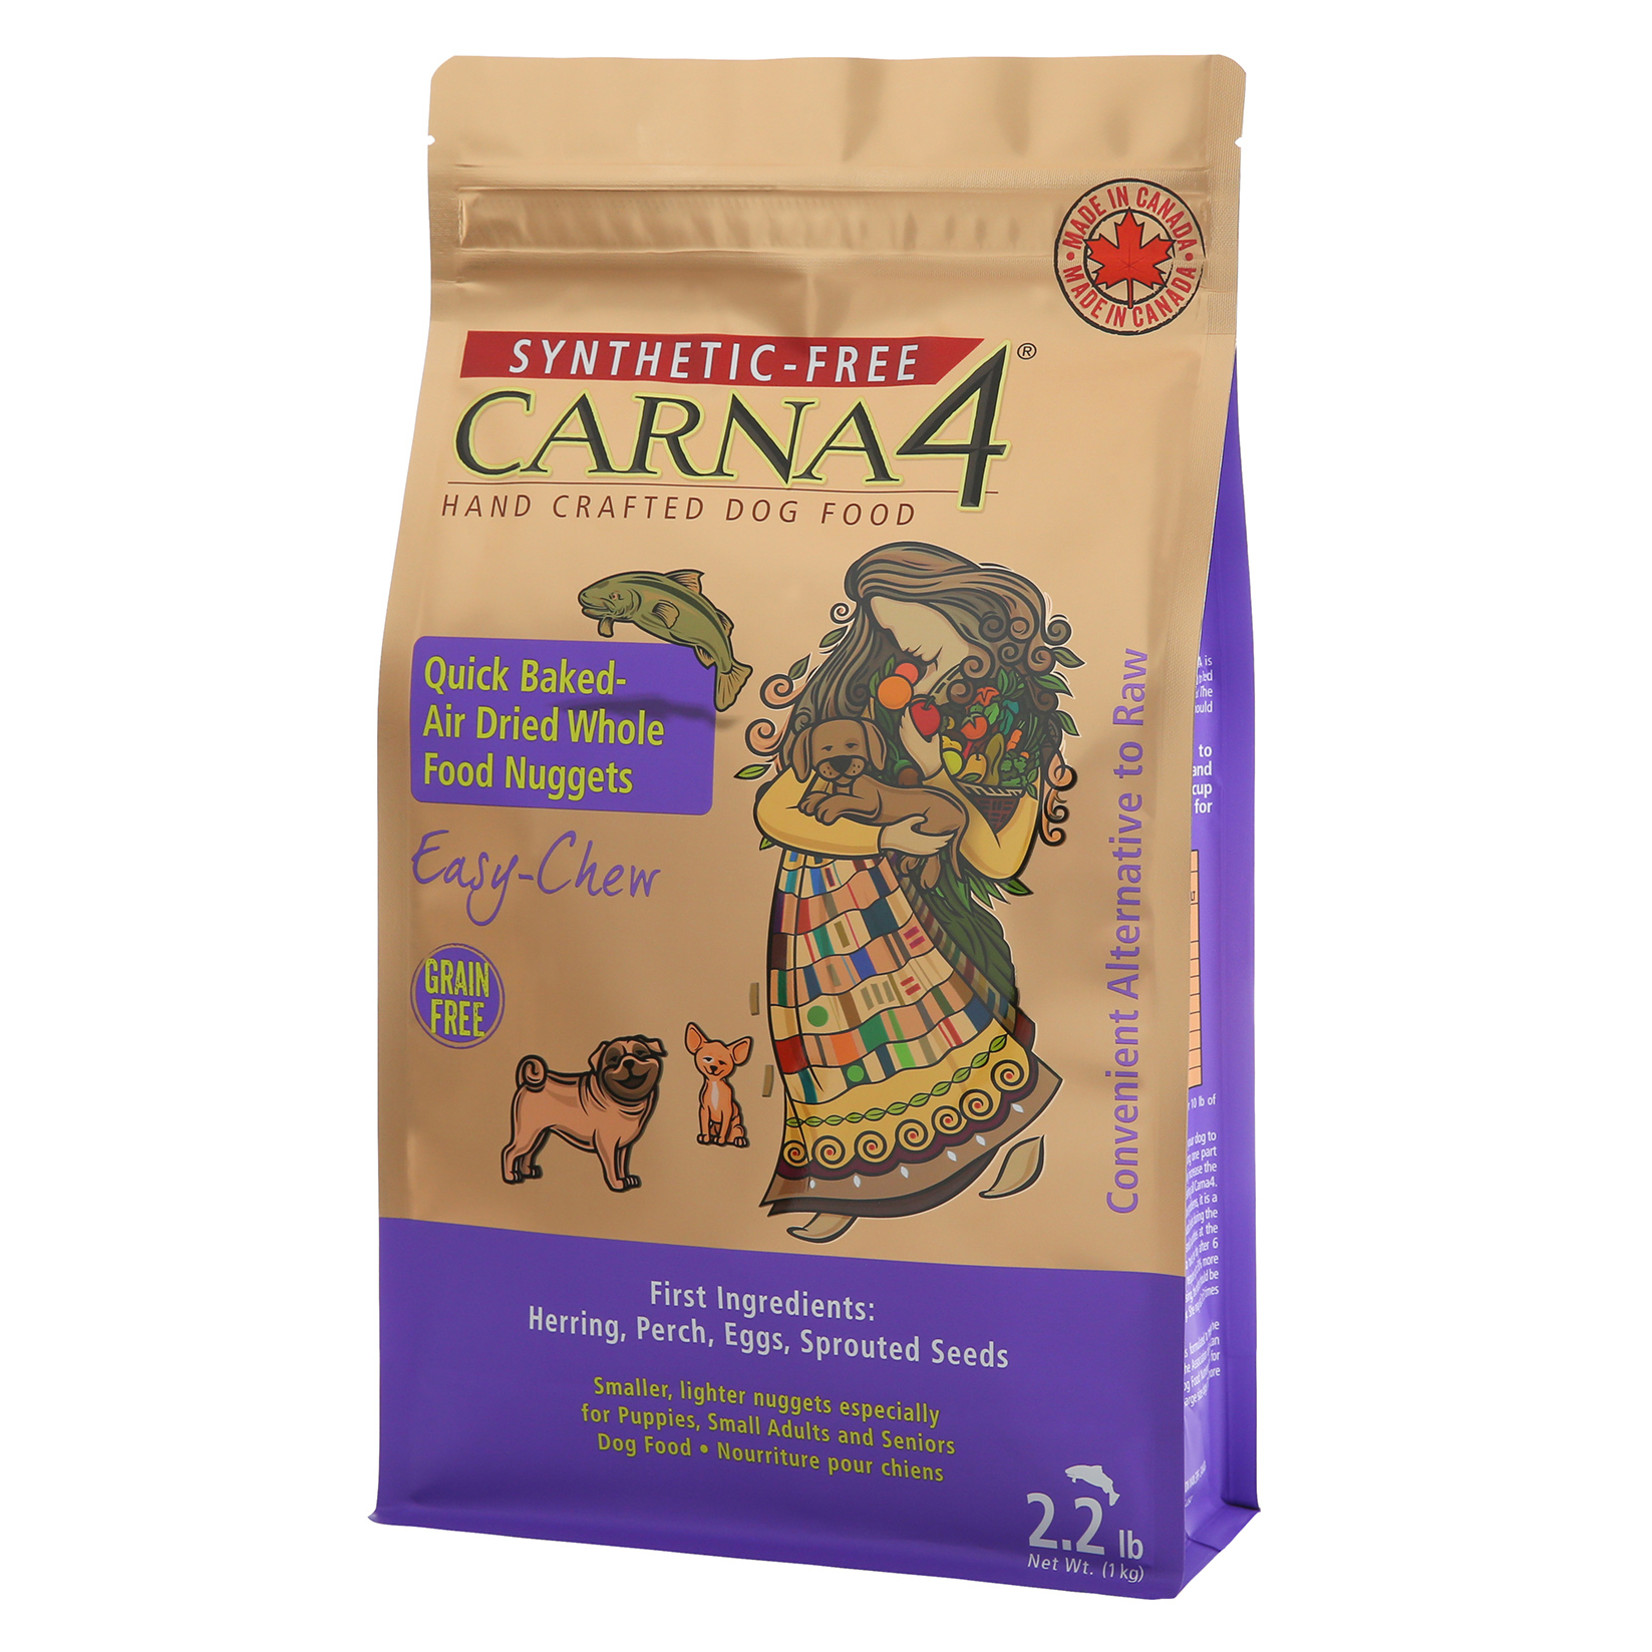 Carna4 Hand Crafted Pet Food Carna4 Hand Crafted Dog Food - Easy-Chew Fish Formula